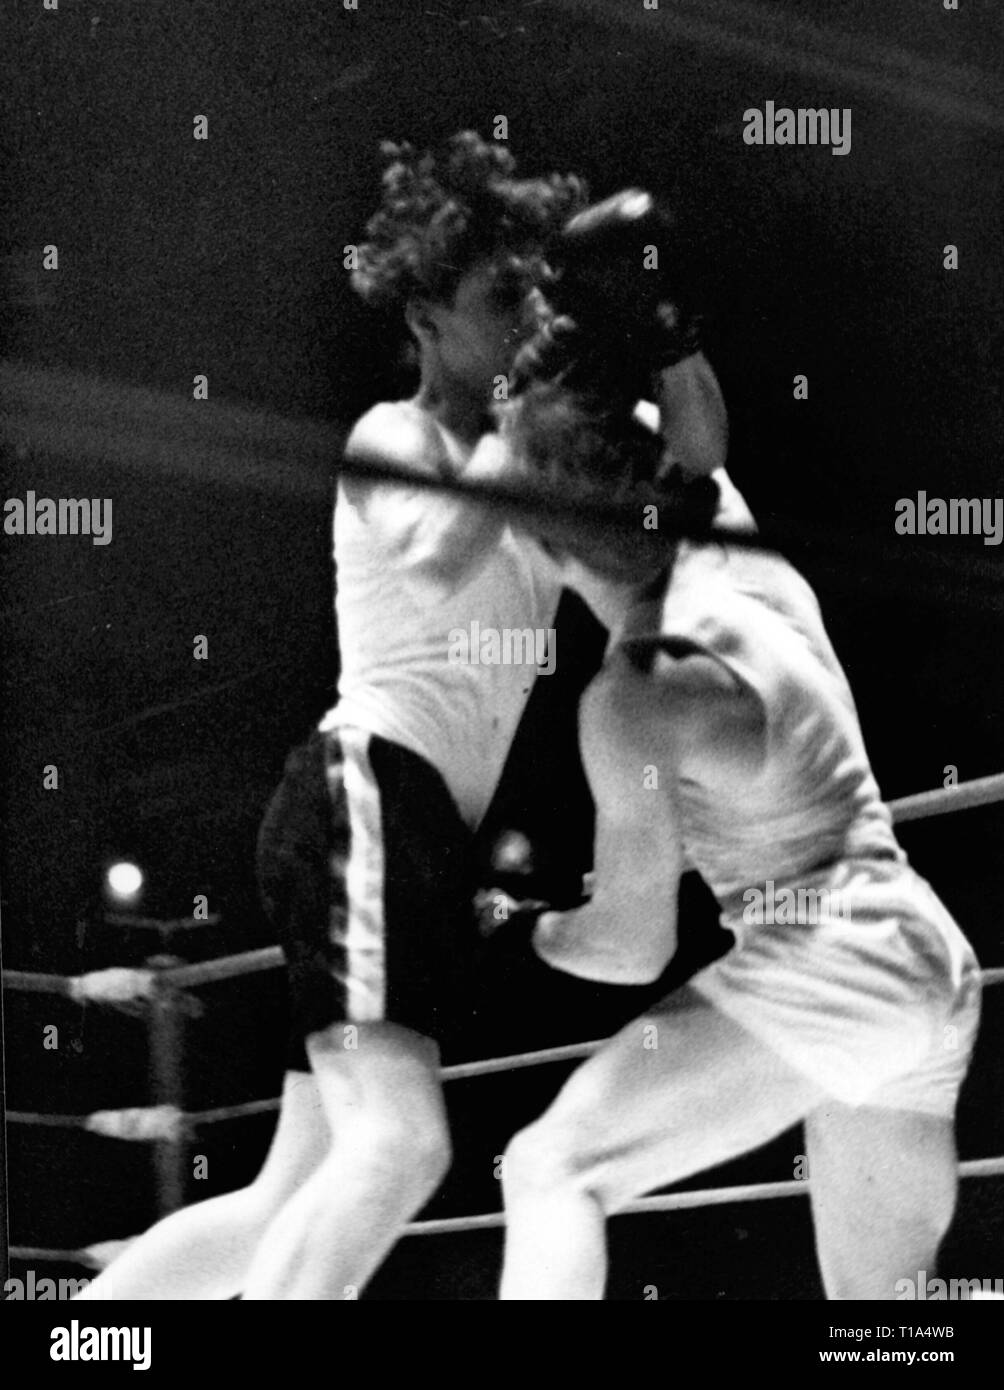 sports, boxing, contest Denmark against Netherlands, boxing match Alf Berthelsen (Denmark) against Herman Looman (Netherlands), Copenhagen, 1946, Additional-Rights-Clearance-Info-Not-Available Stock Photo